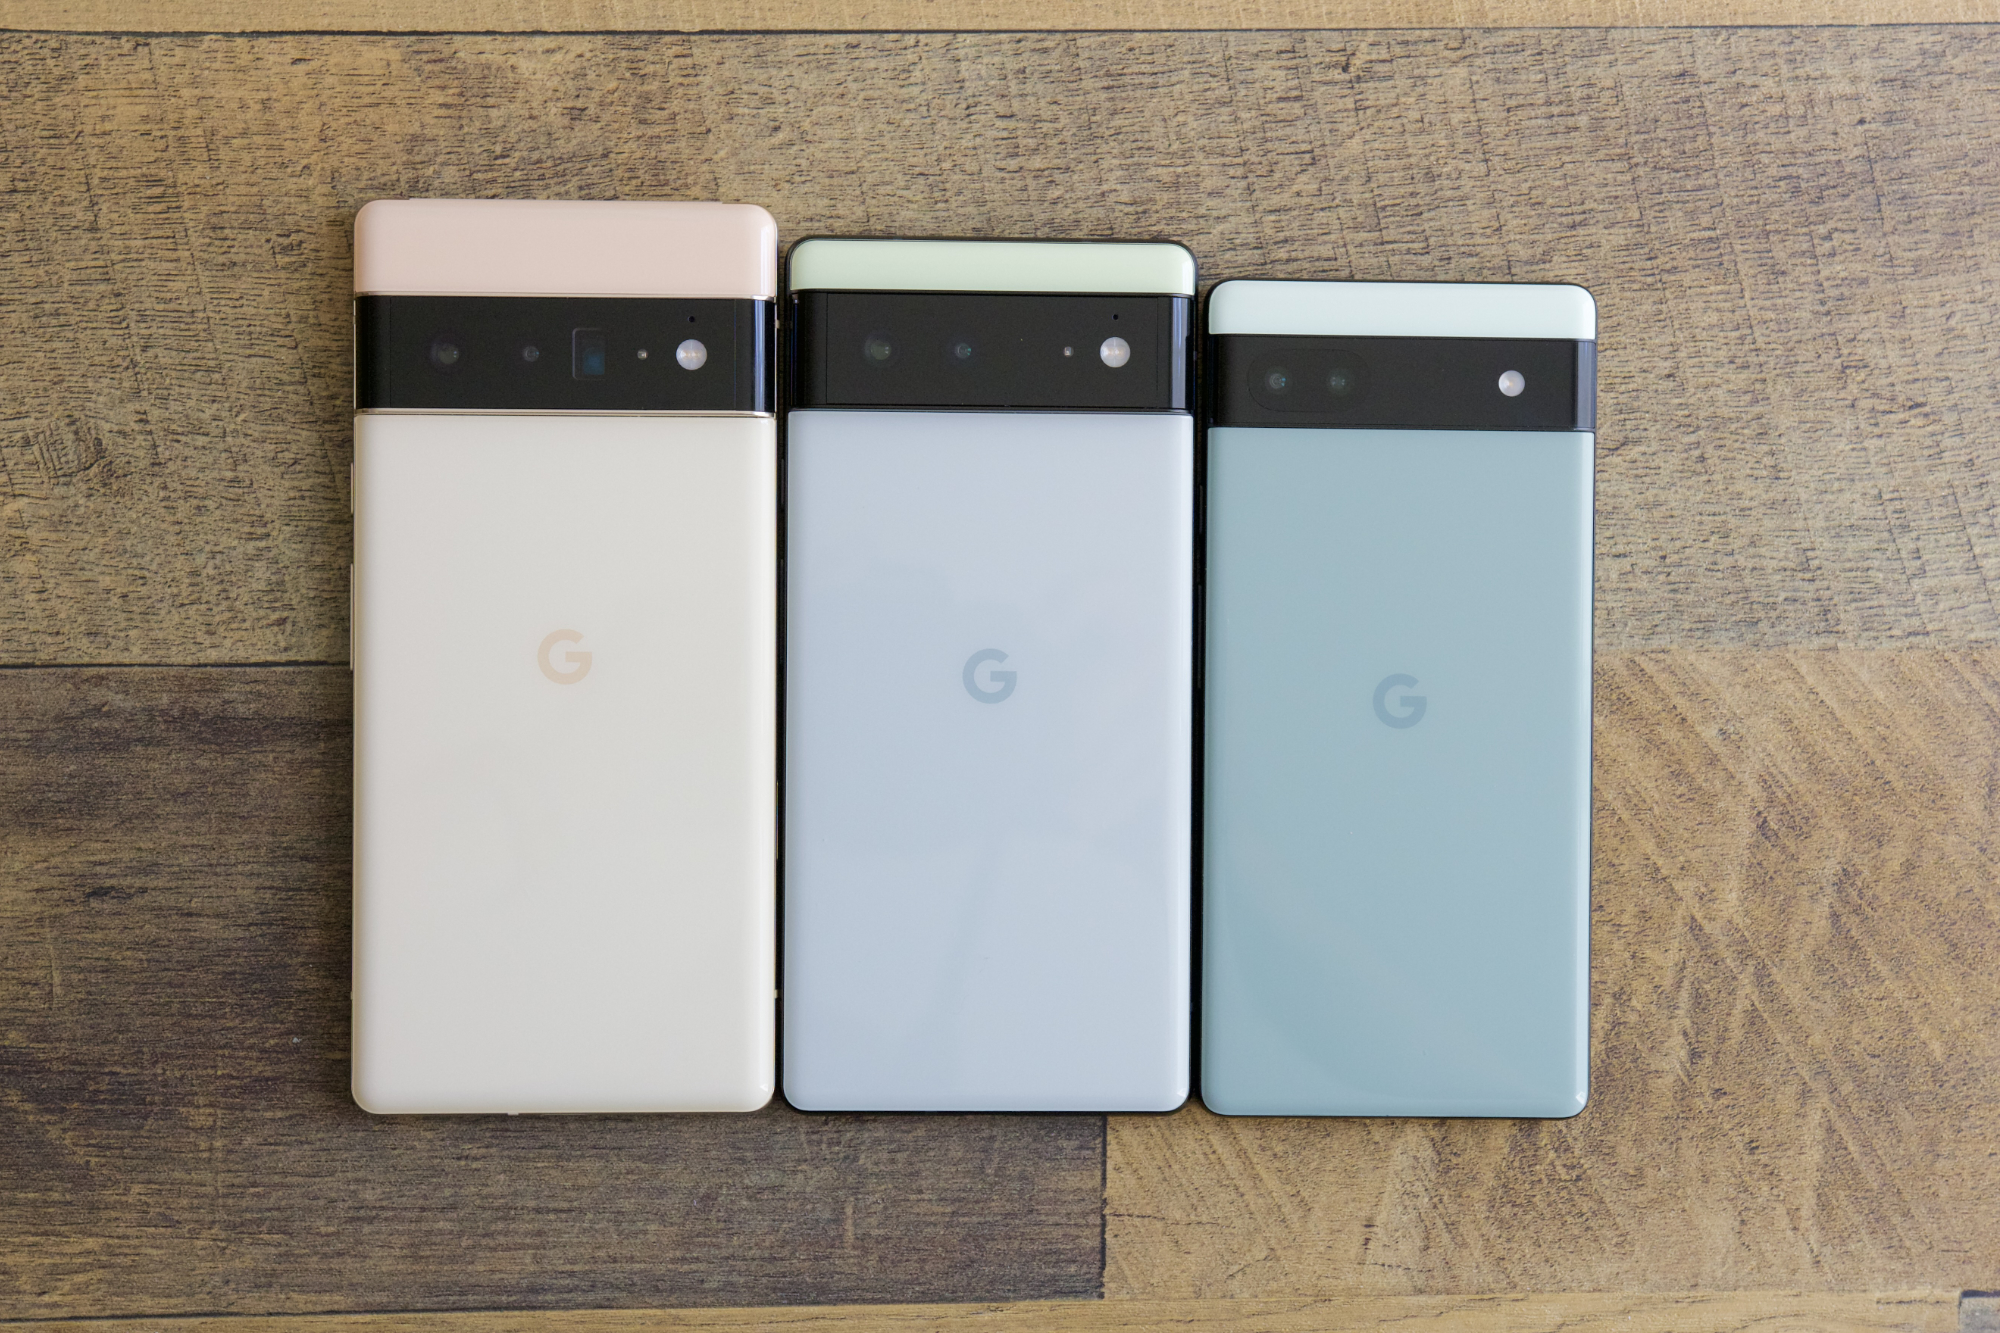 The Google Pixel 6 Pro, Pixel 6, and Pixel 6a all lined up on a wooden desk.